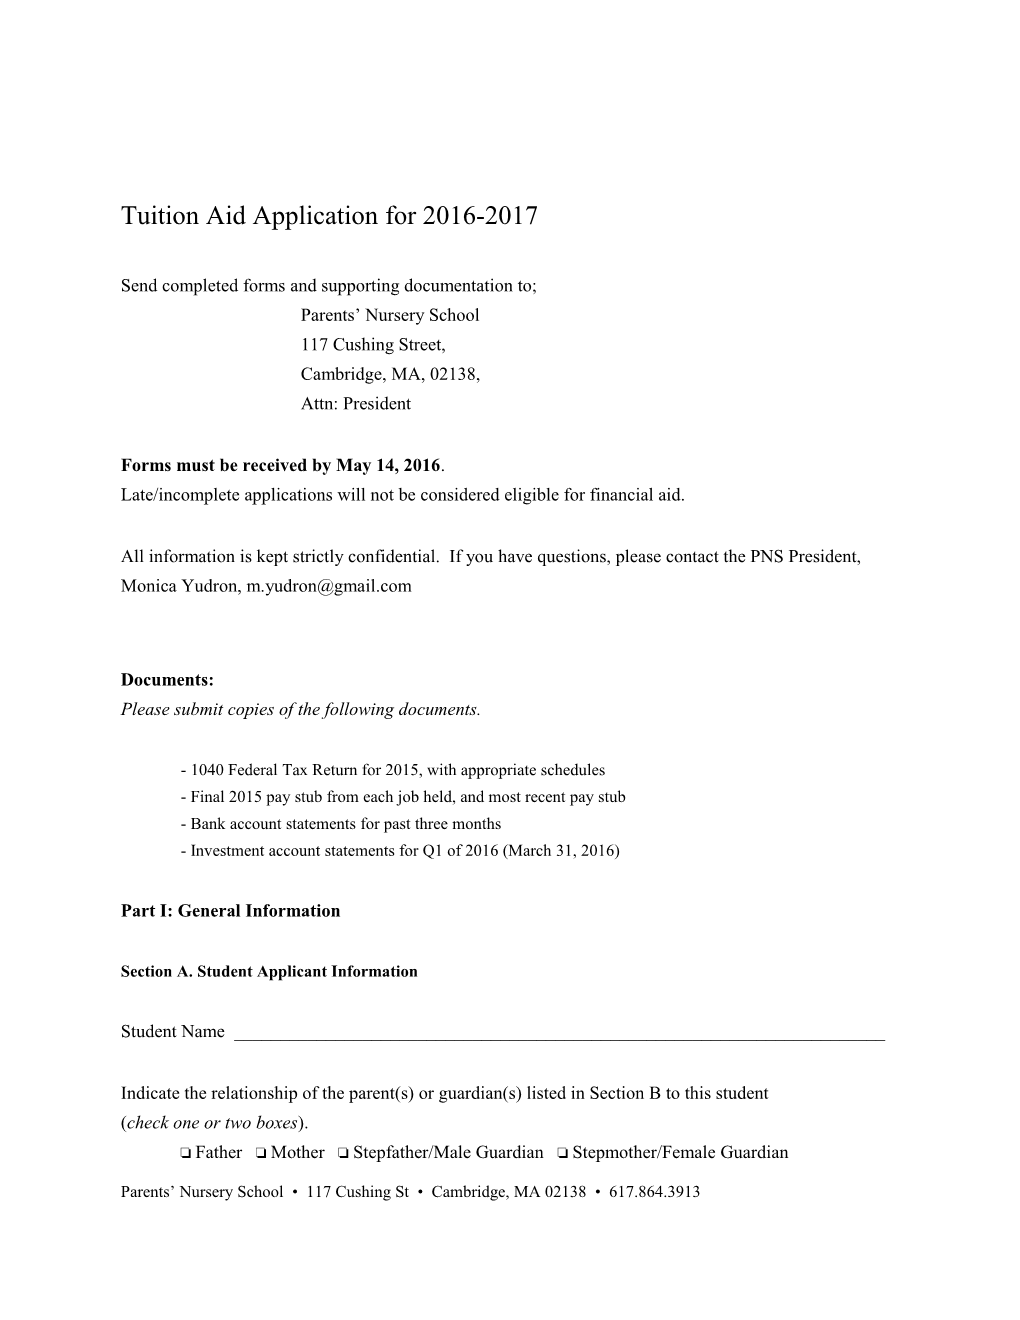 Tuition Aid Application for 2016-2017